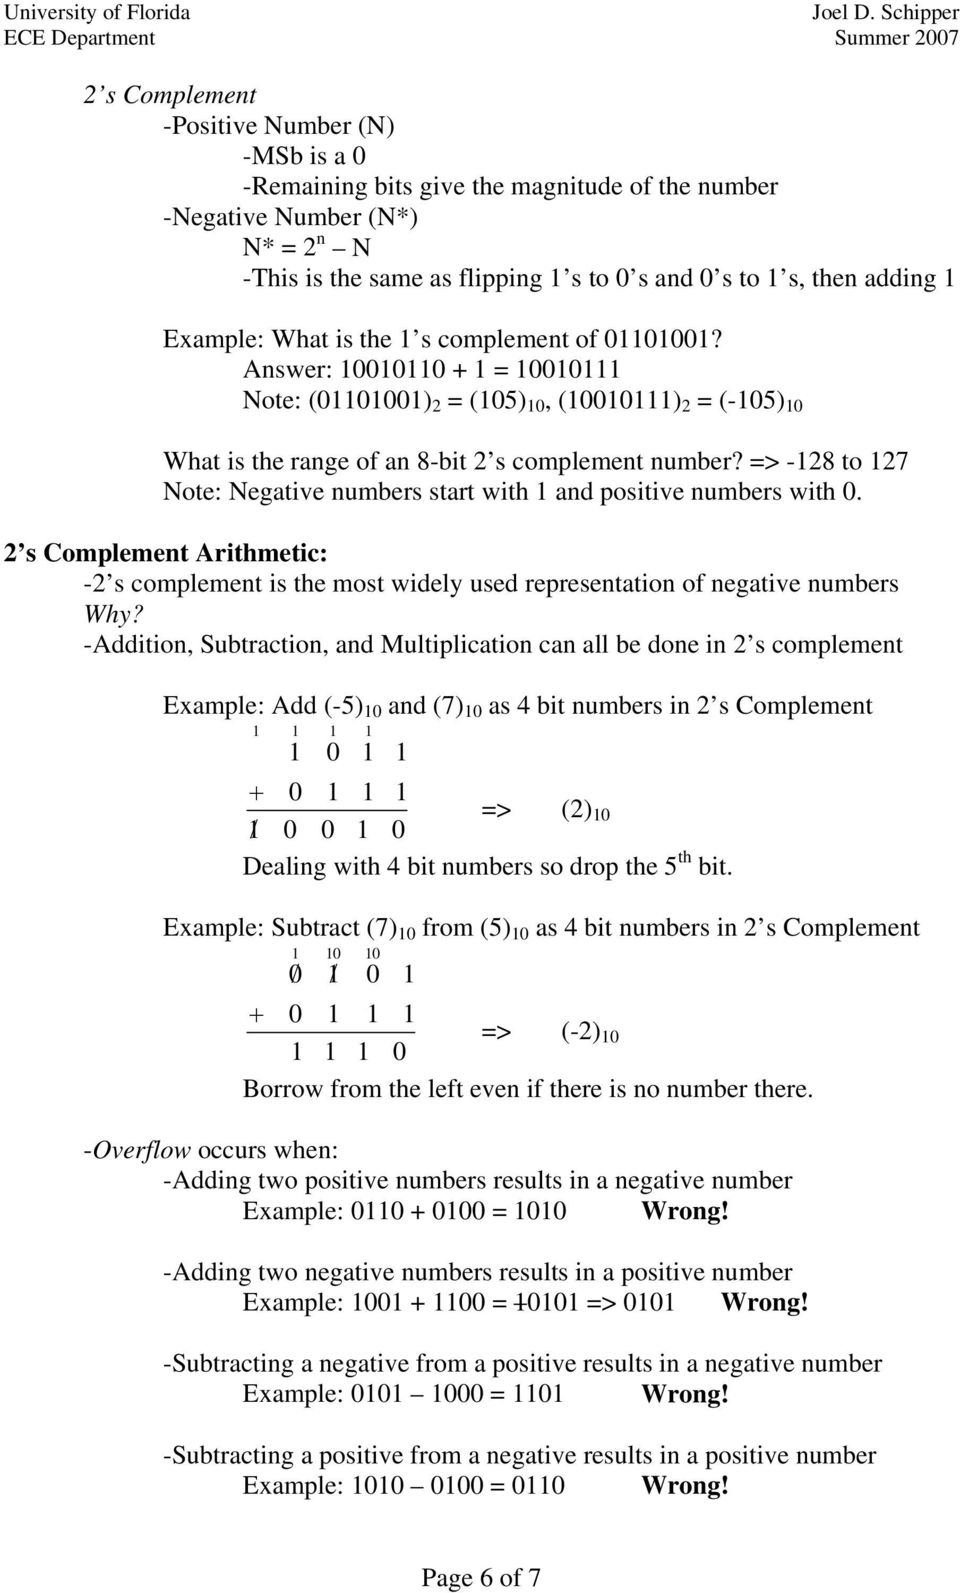 s Complement Arithmetic: - s complement is the most widely used representation of negative numbers Why?